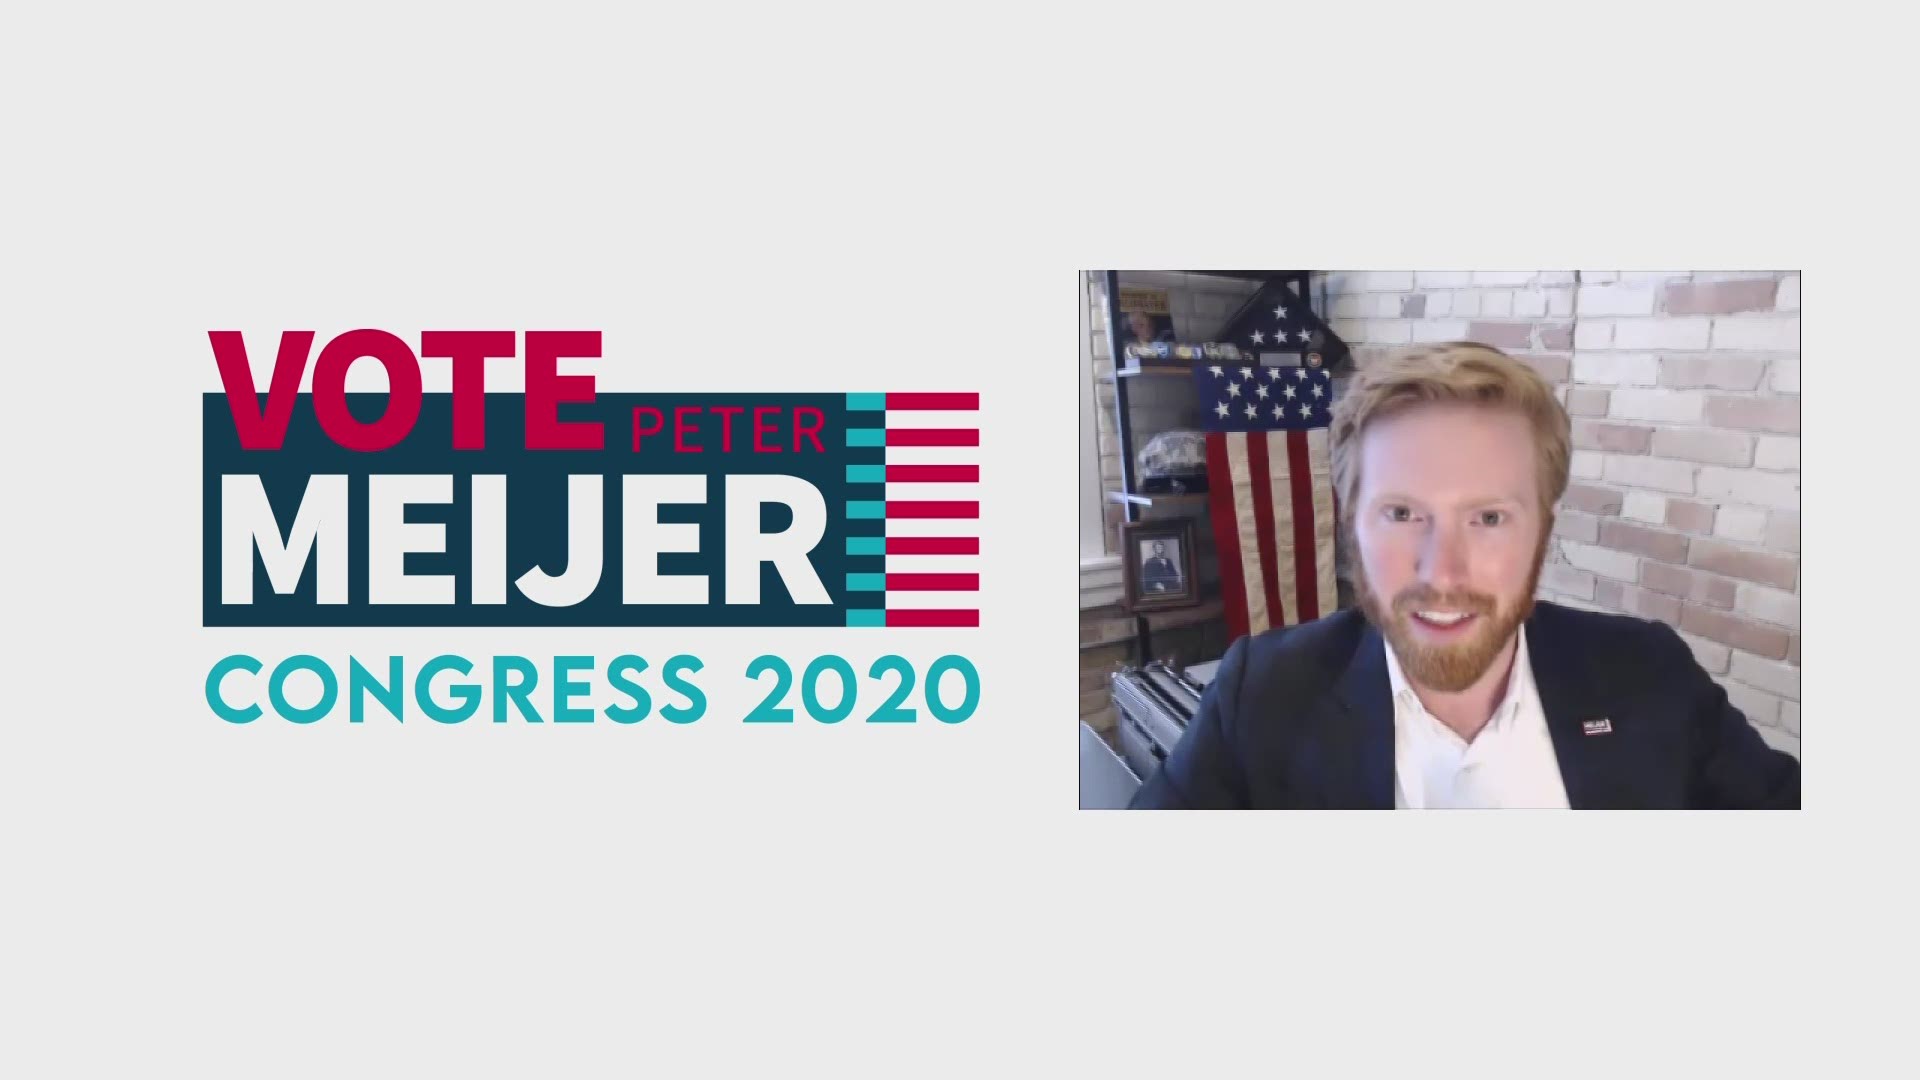 A one-on-one interview with Peter Meijer, a Republican who is running for a seat in the U.S. Congress.